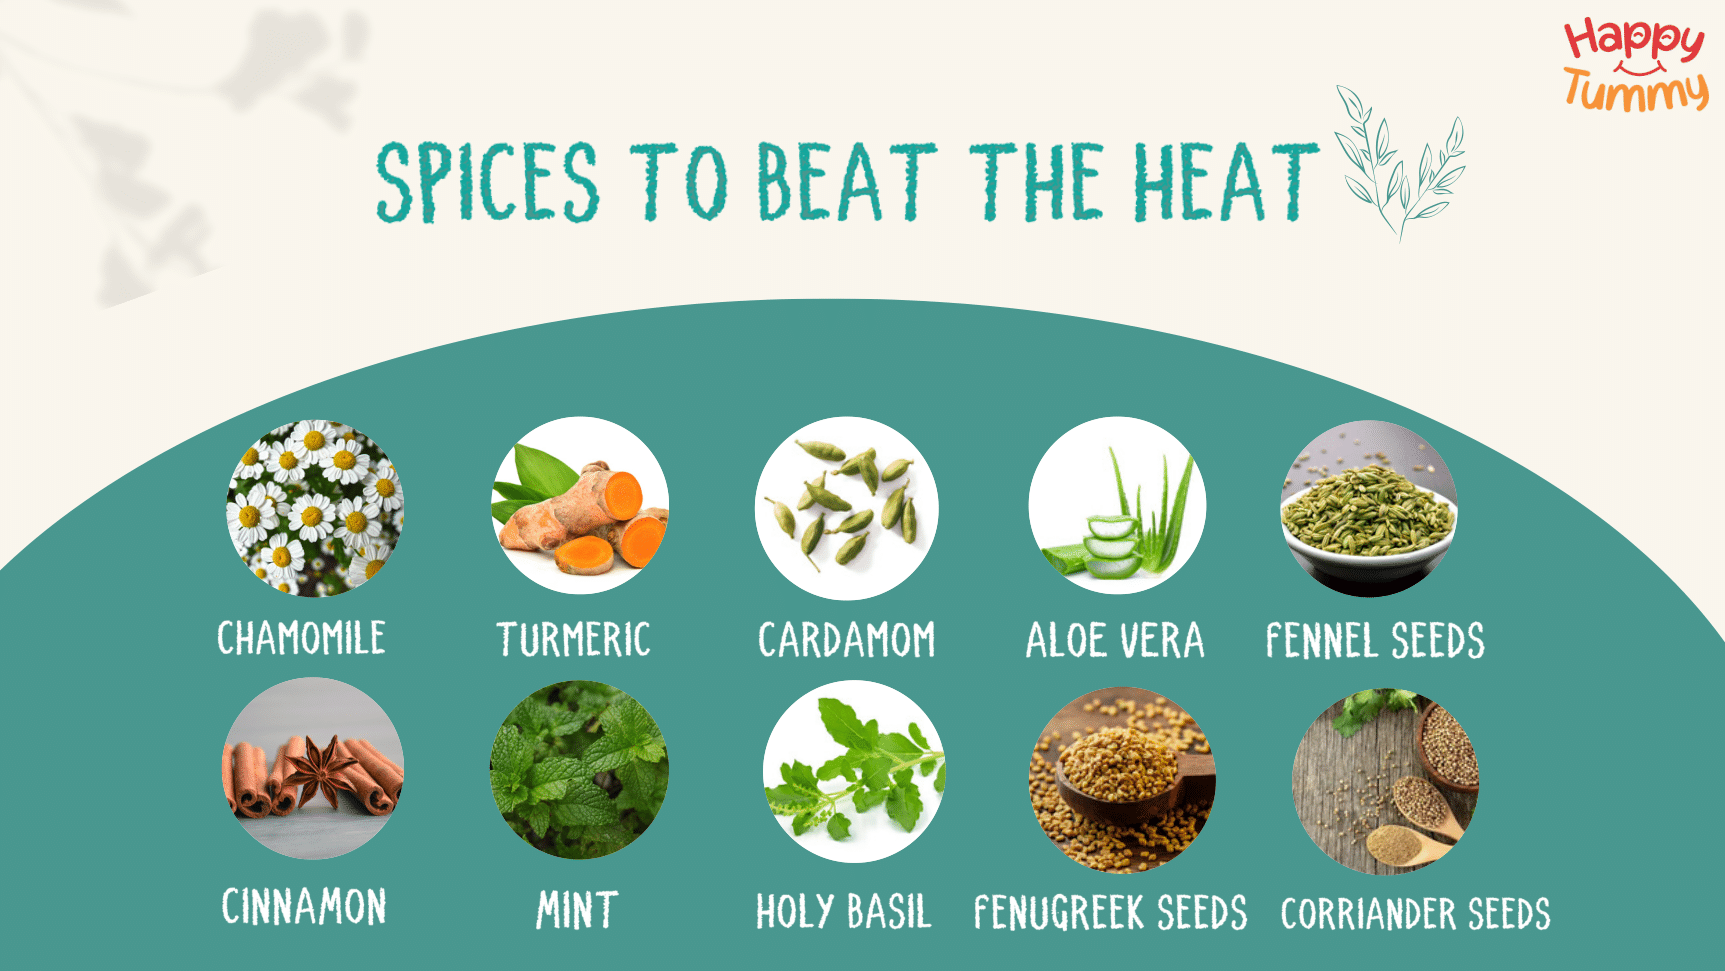 Spices to beat the heat: Anti-inflammatory and cooling spices and herbs